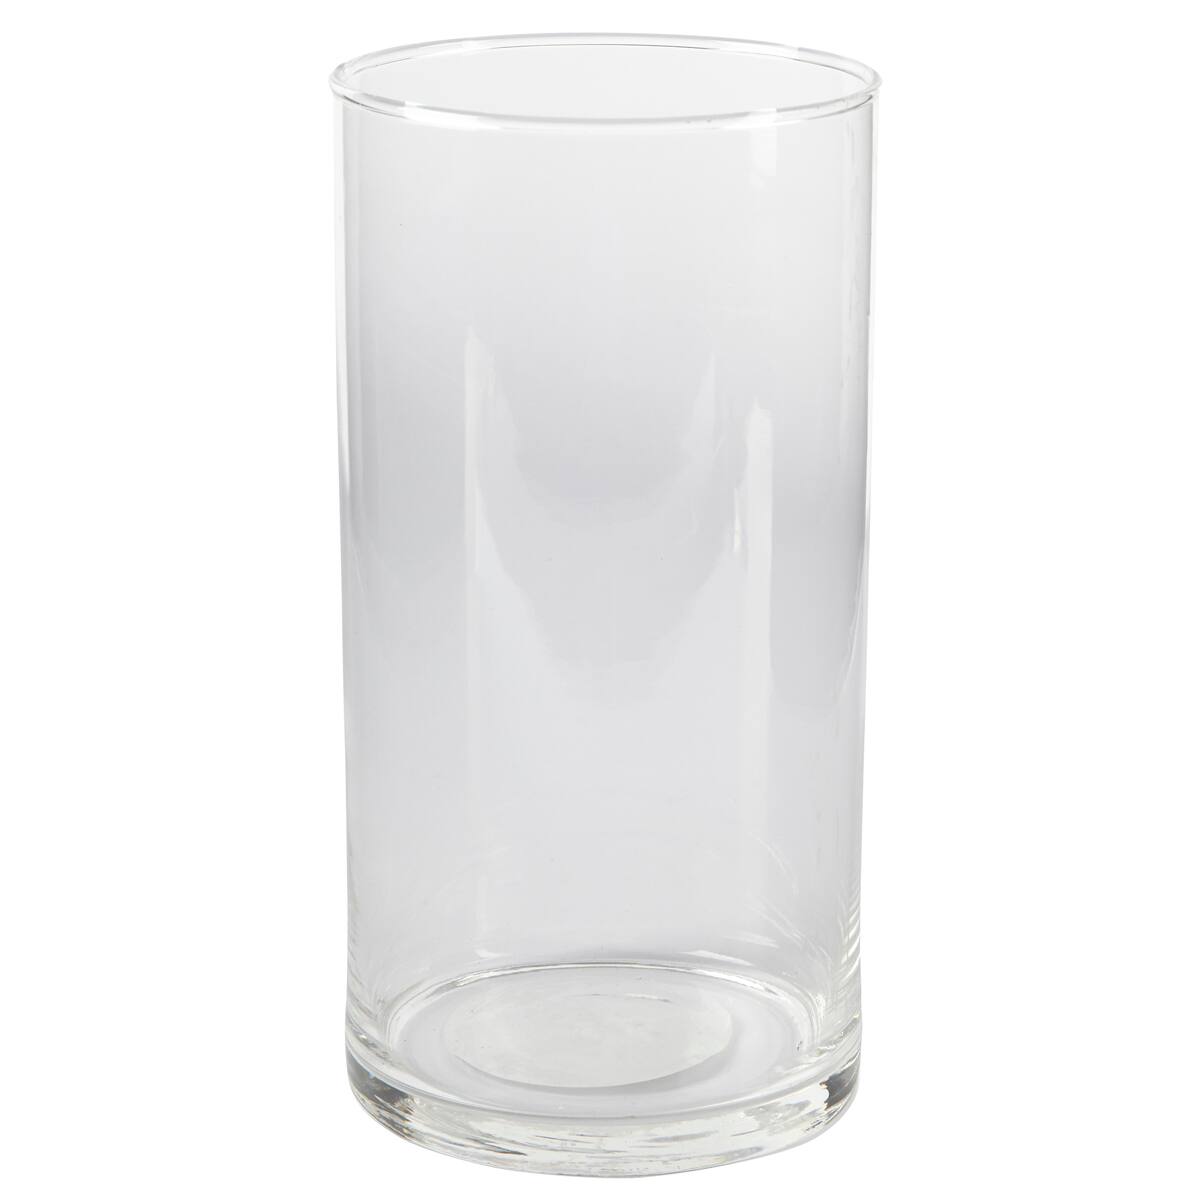 Purchase The Glass Cylinder Candle Holder By Ashland® At Michaels